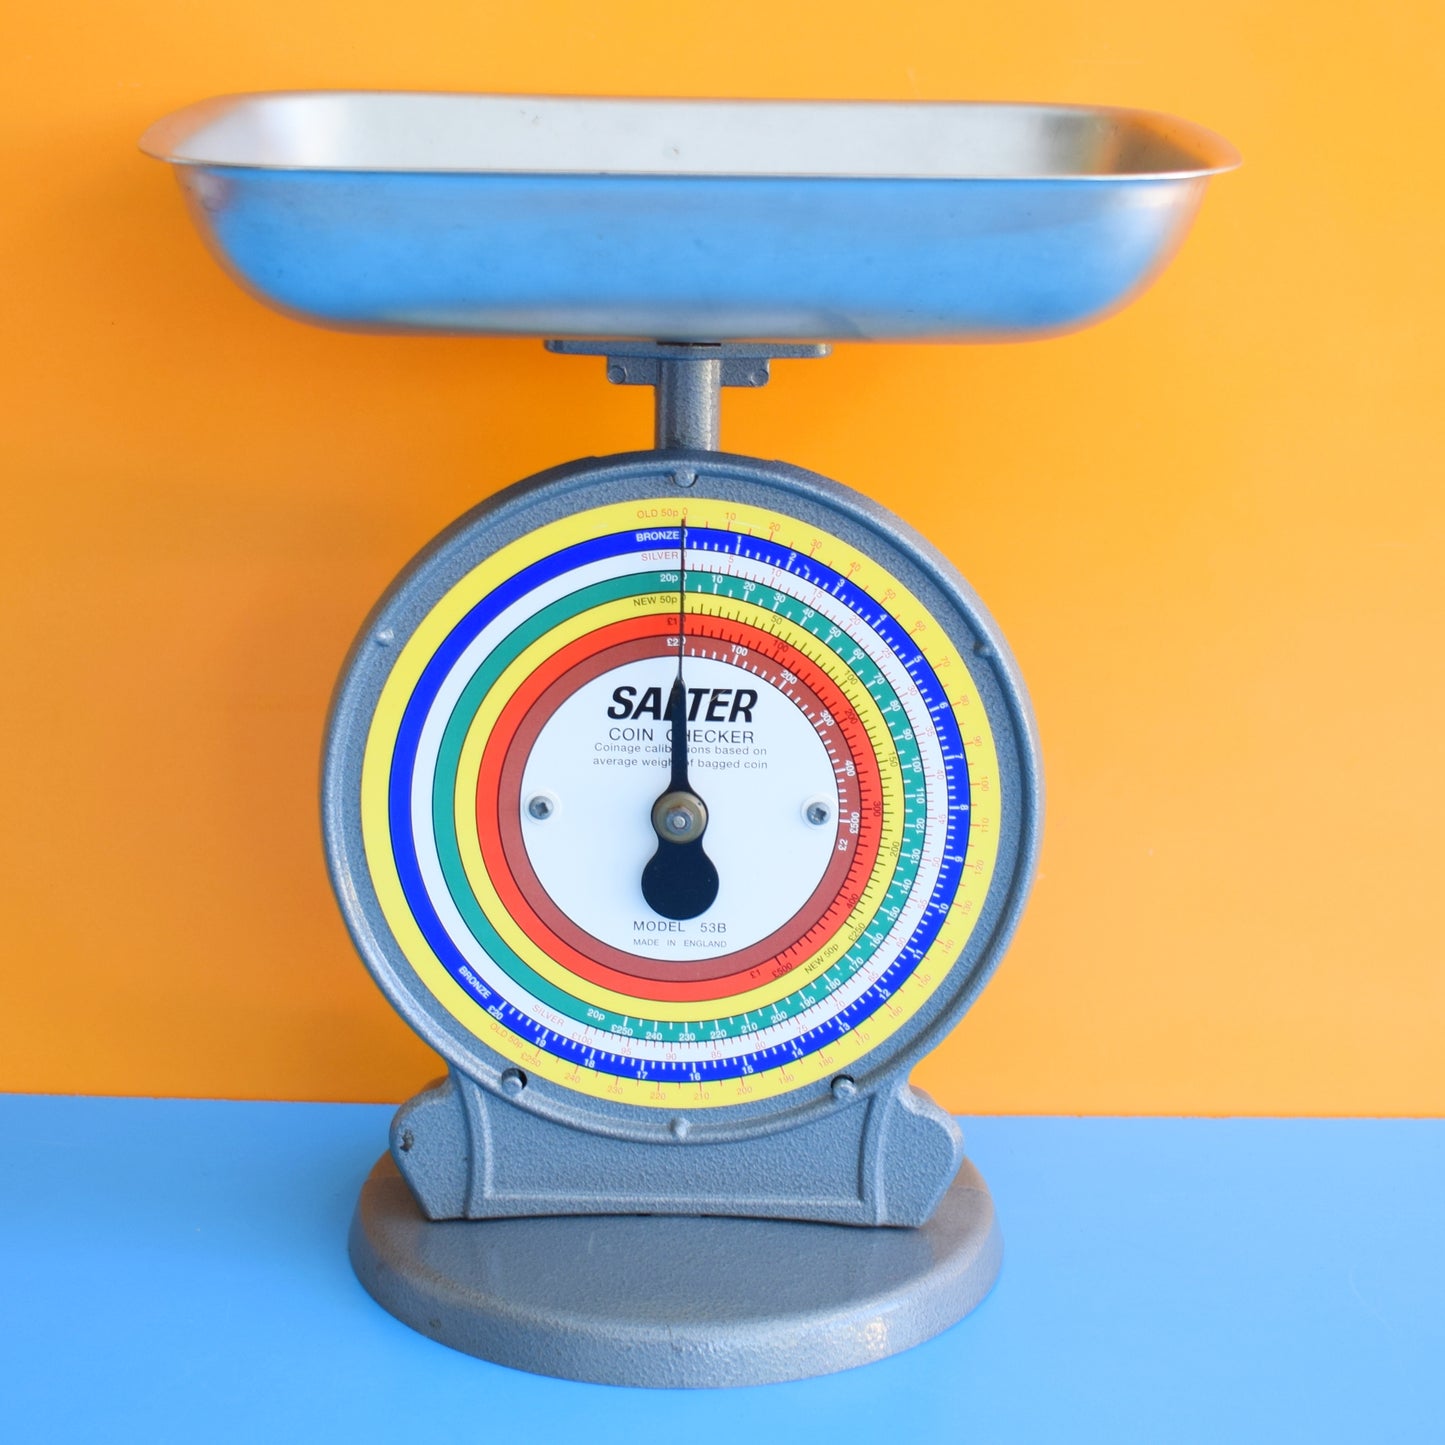 Vintage 1990s Salter Bank Coin Scales